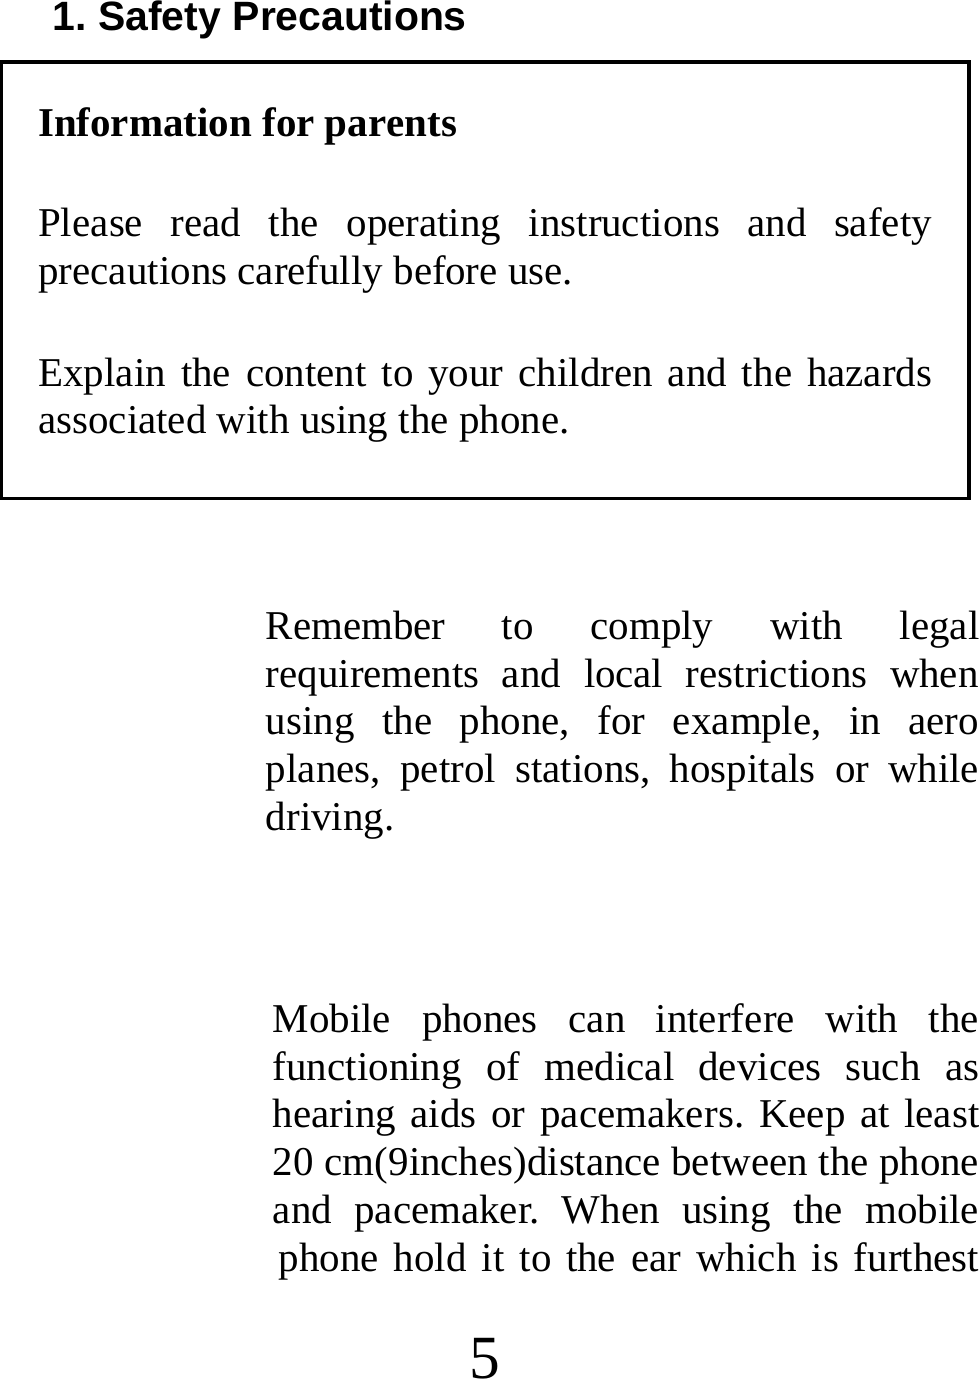  5 1. Safety Precautions Information for parents Please read the operating instructions and safety precautions carefully before use.   Explain the content to your children and the hazards associated with using the phone.  Remember to comply with legal requirements and local restrictions when using the phone, for example, in aero planes, petrol stations, hospitals or while driving.  Mobile phones can interfere with the functioning of medical devices such as hearing aids or pacemakers. Keep at least 20 cm(9inches)distance between the phone and pacemaker. When using the mobile phone hold it to the ear which is furthest 